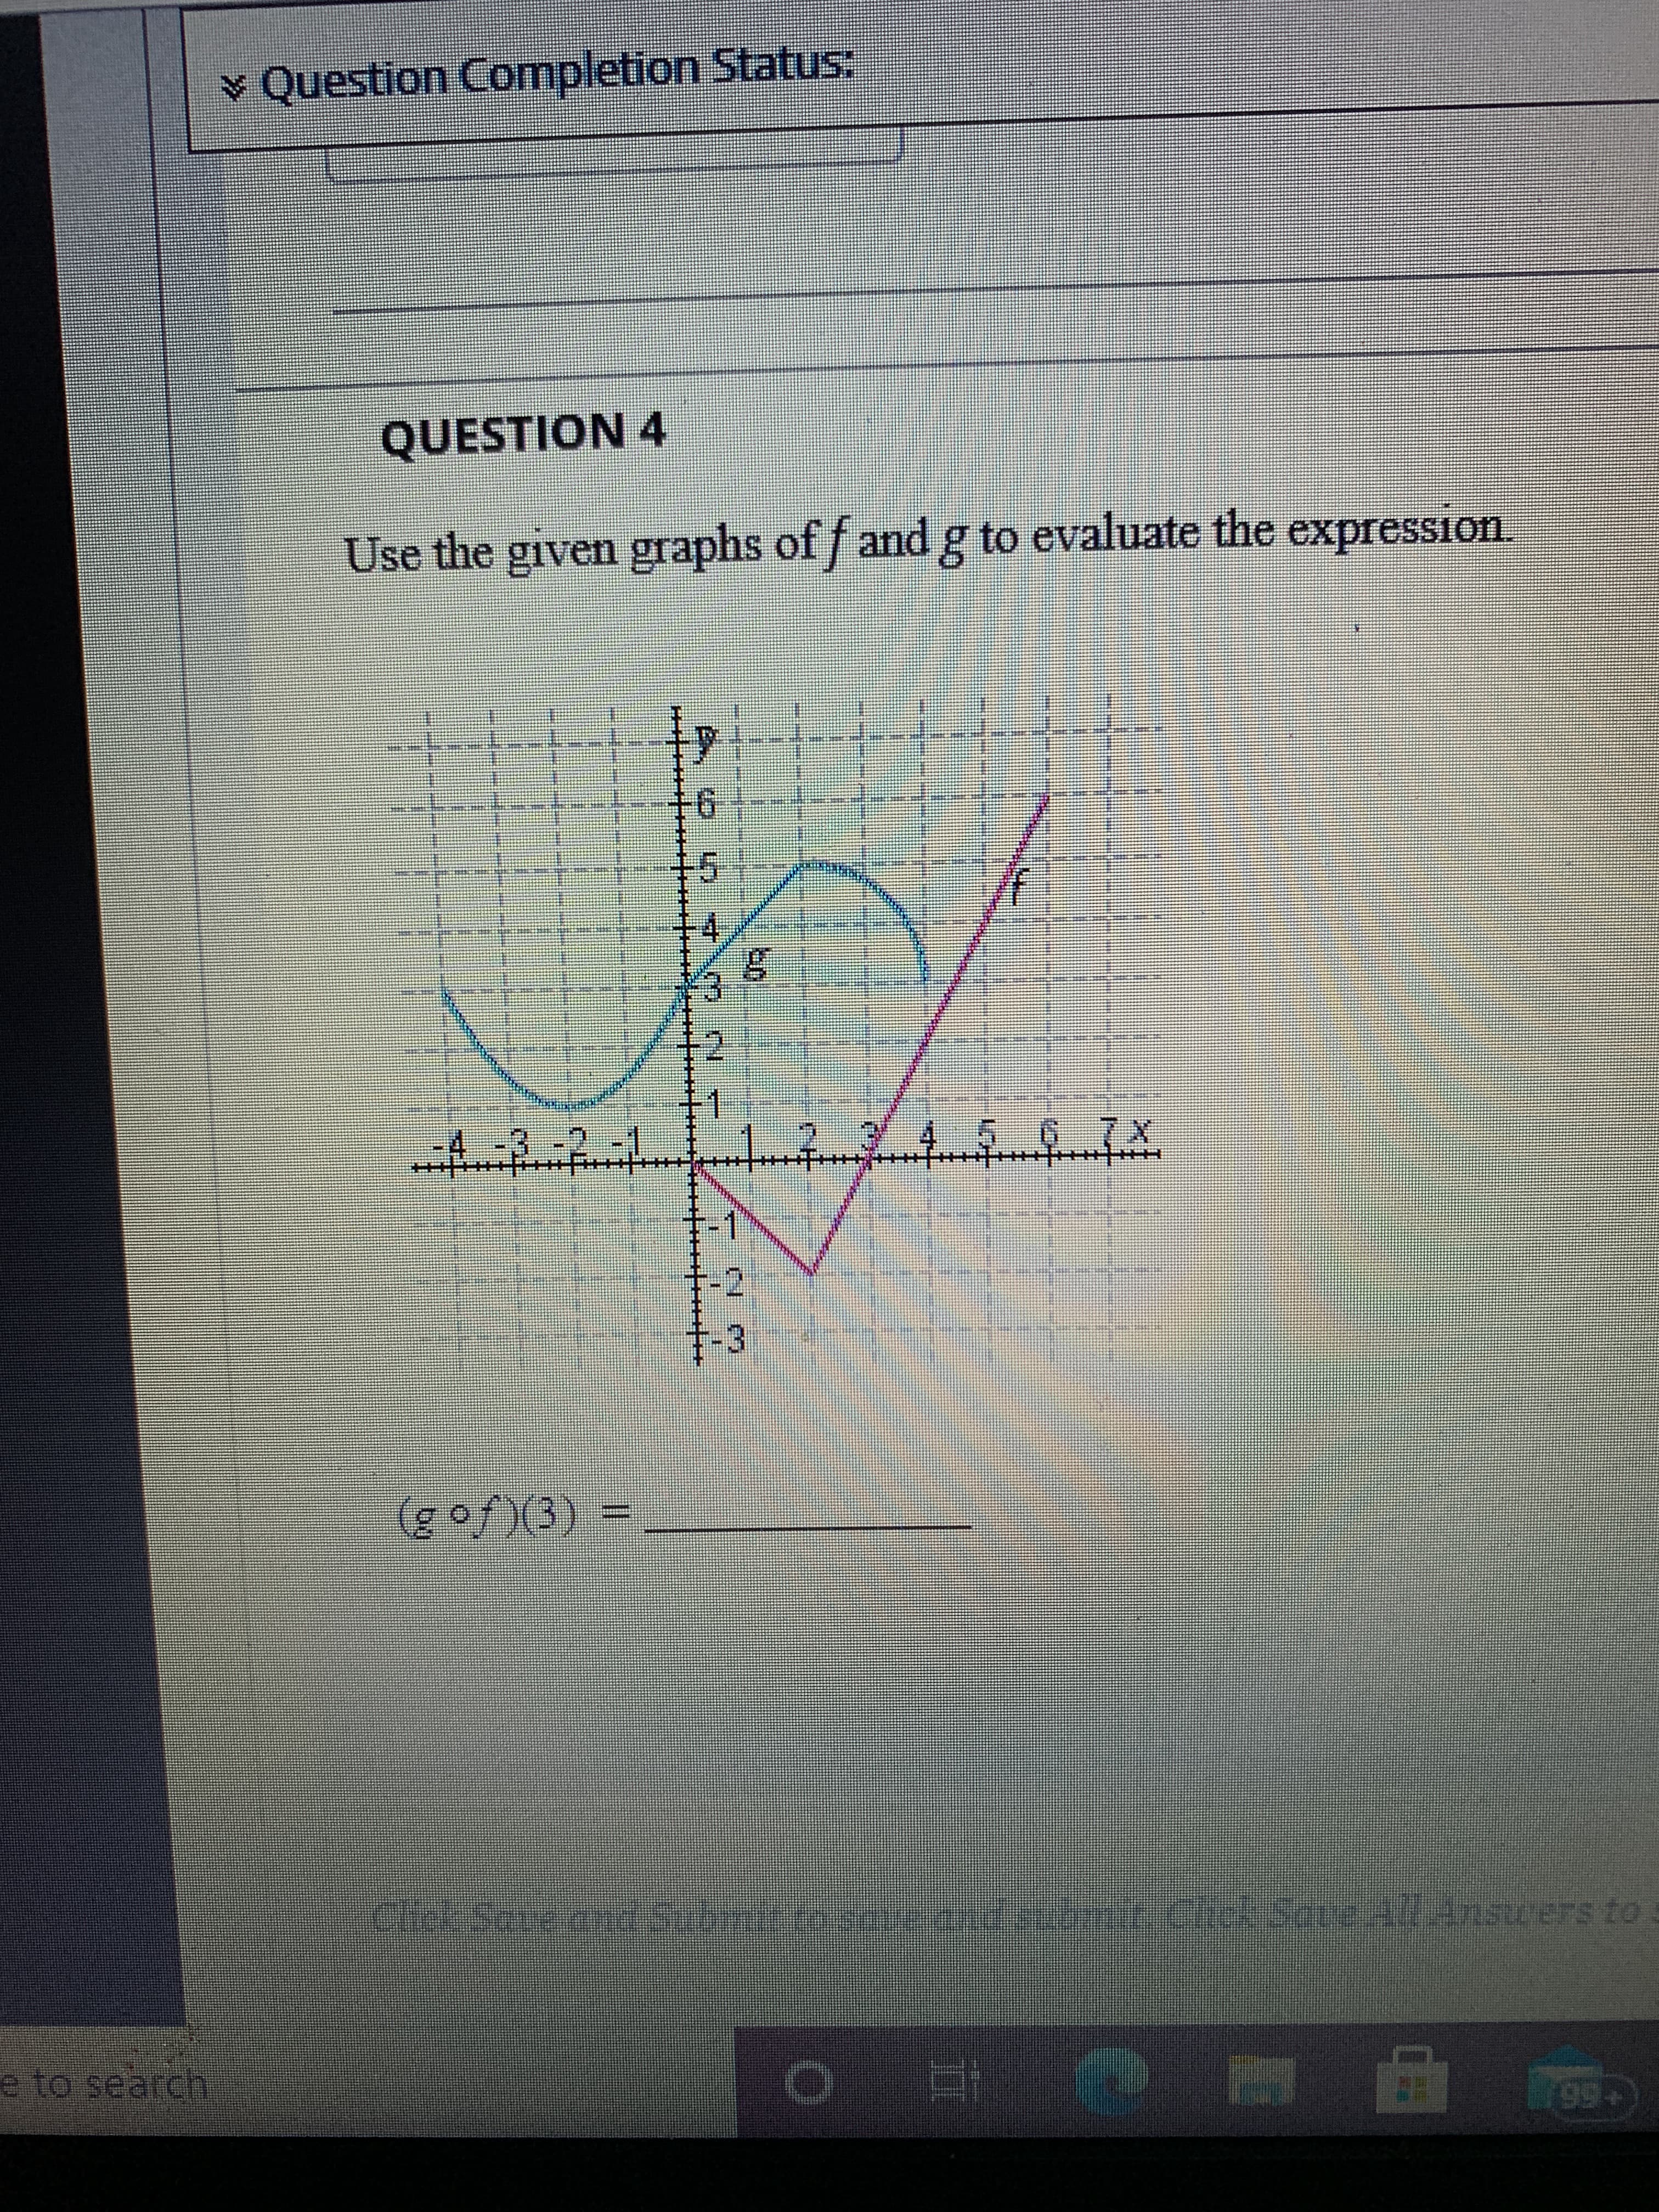 Use the given graphs of f and g to evaluate the expression.
